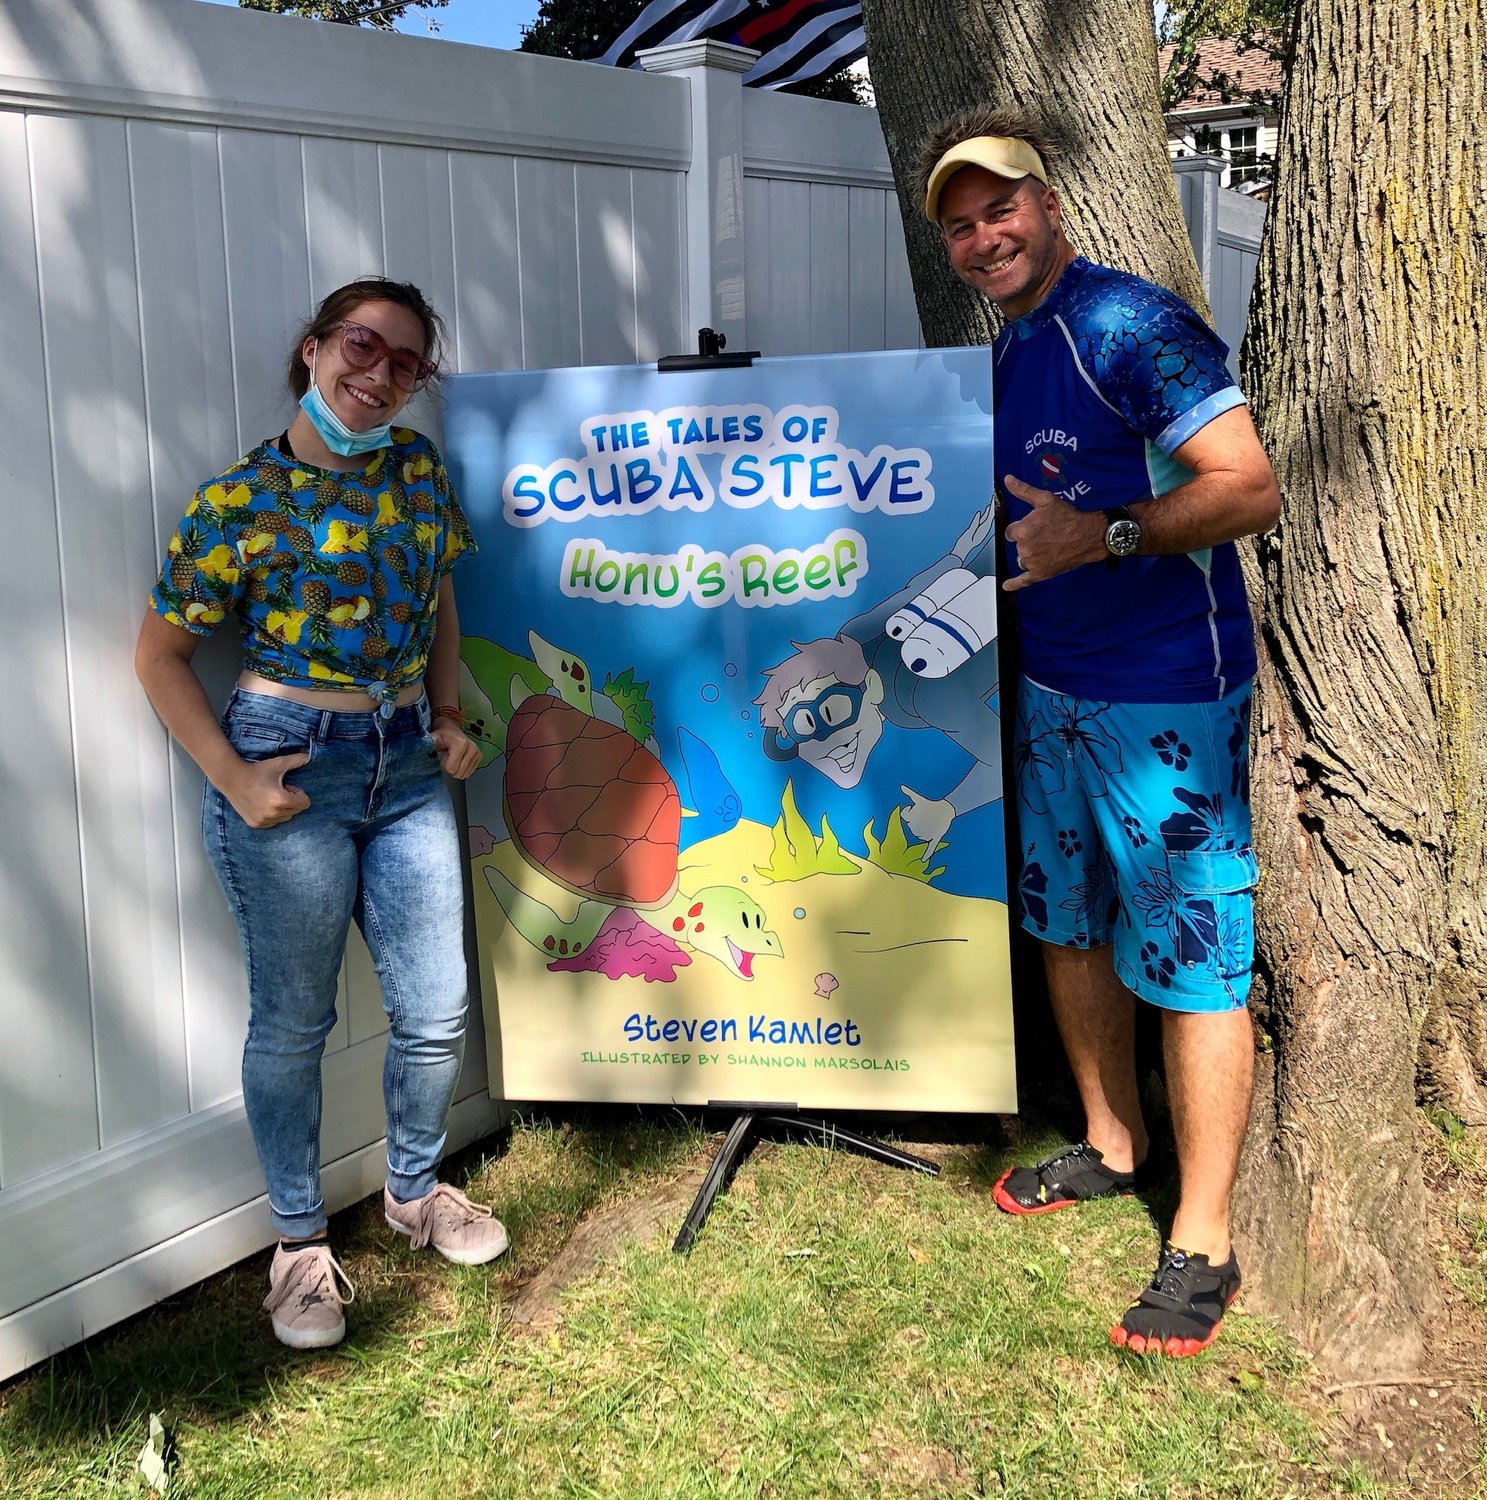 North Merrick resident Steven Kamlet, right, has written a children’s chapter book called “The Tales of Scuba Steve,” with illustrations by East Meadow High School student Shannon Marsolais.